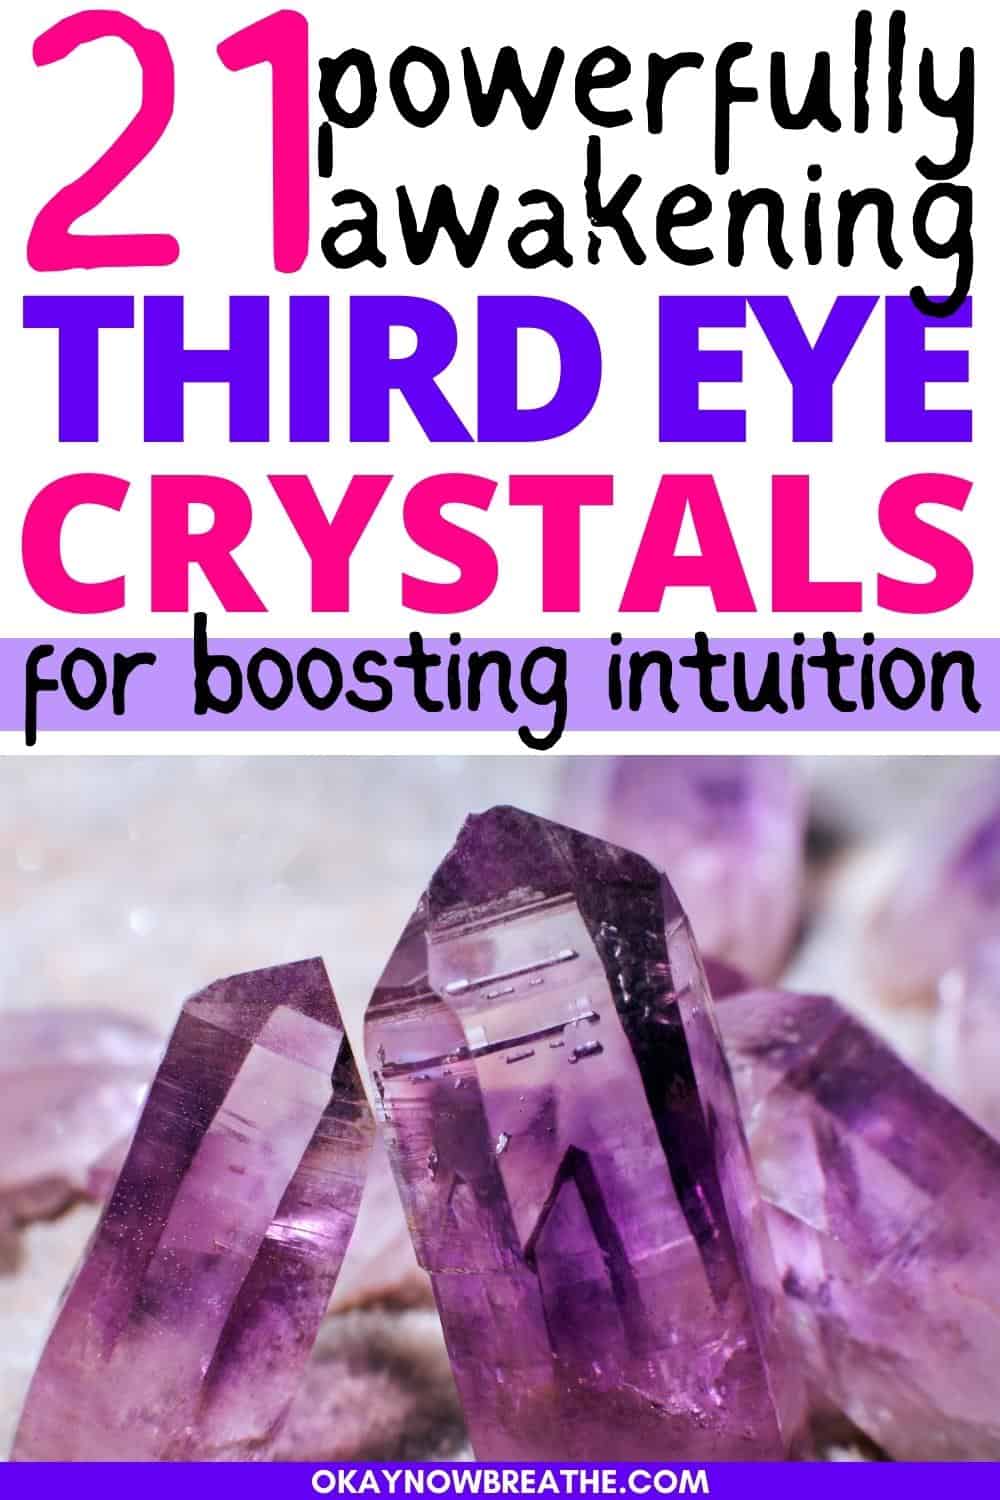 There are 3 amethyst crystal points. Above that, there is text that says: 21 powerfully awakening third eye crystals for boosting intuition